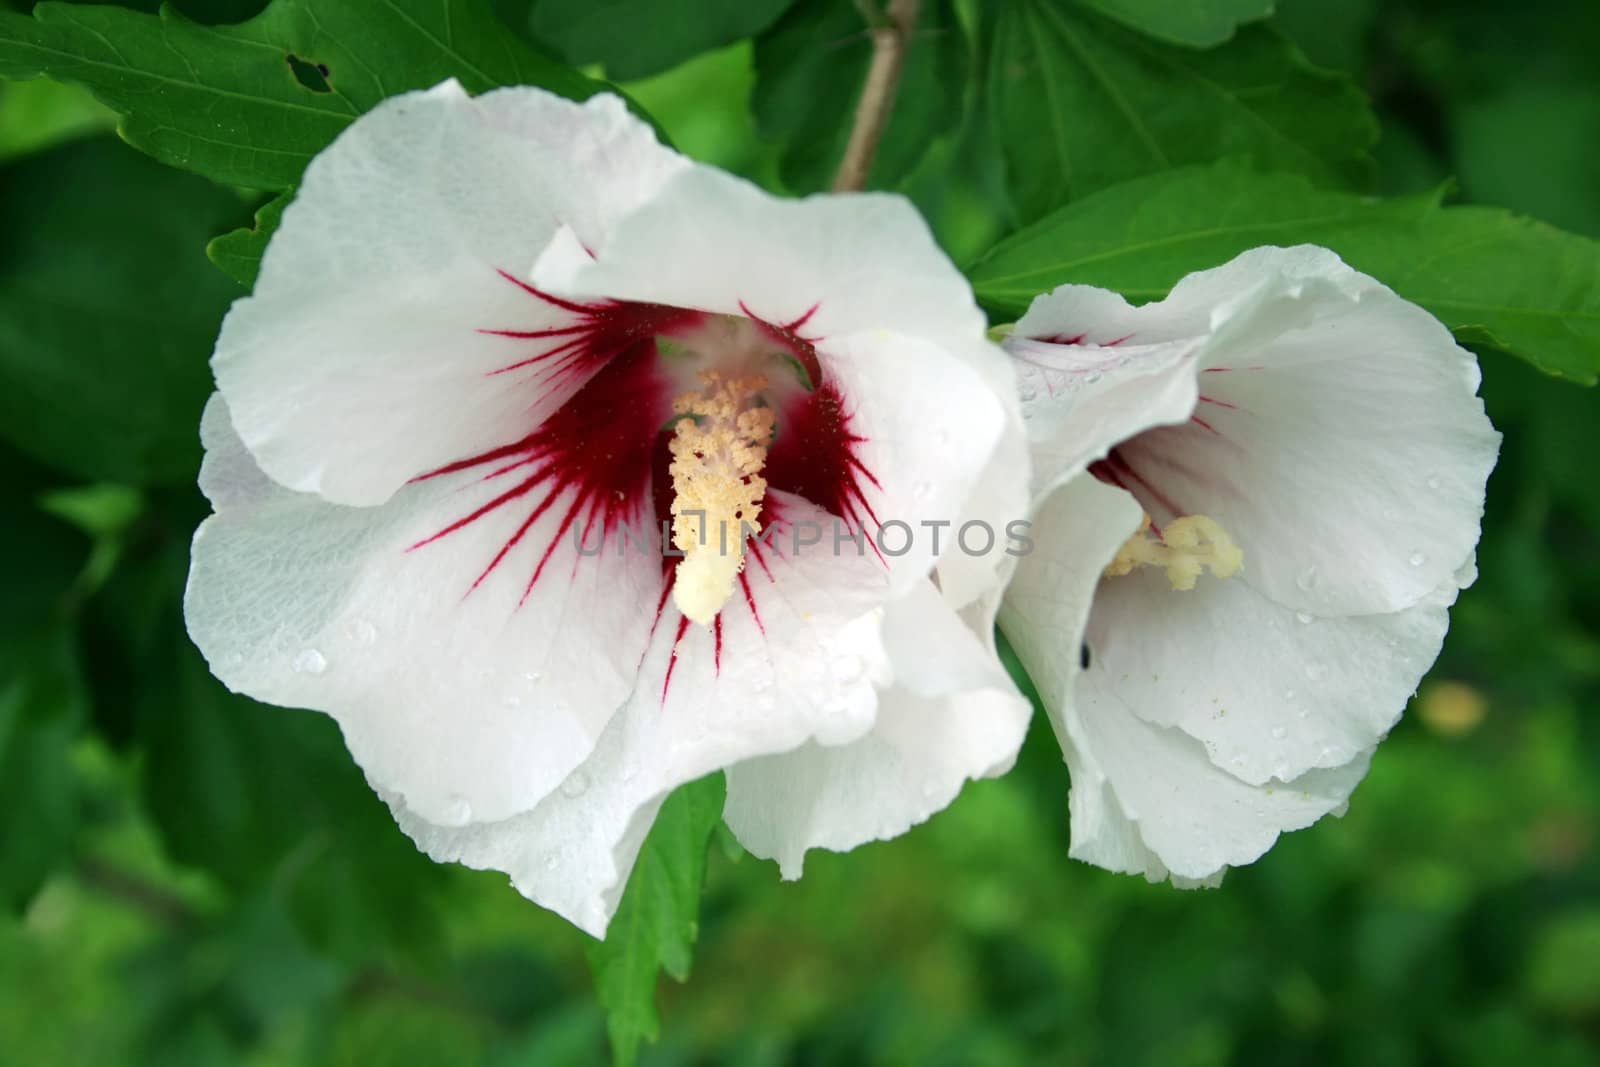 This image shows two bloom of hibiscus